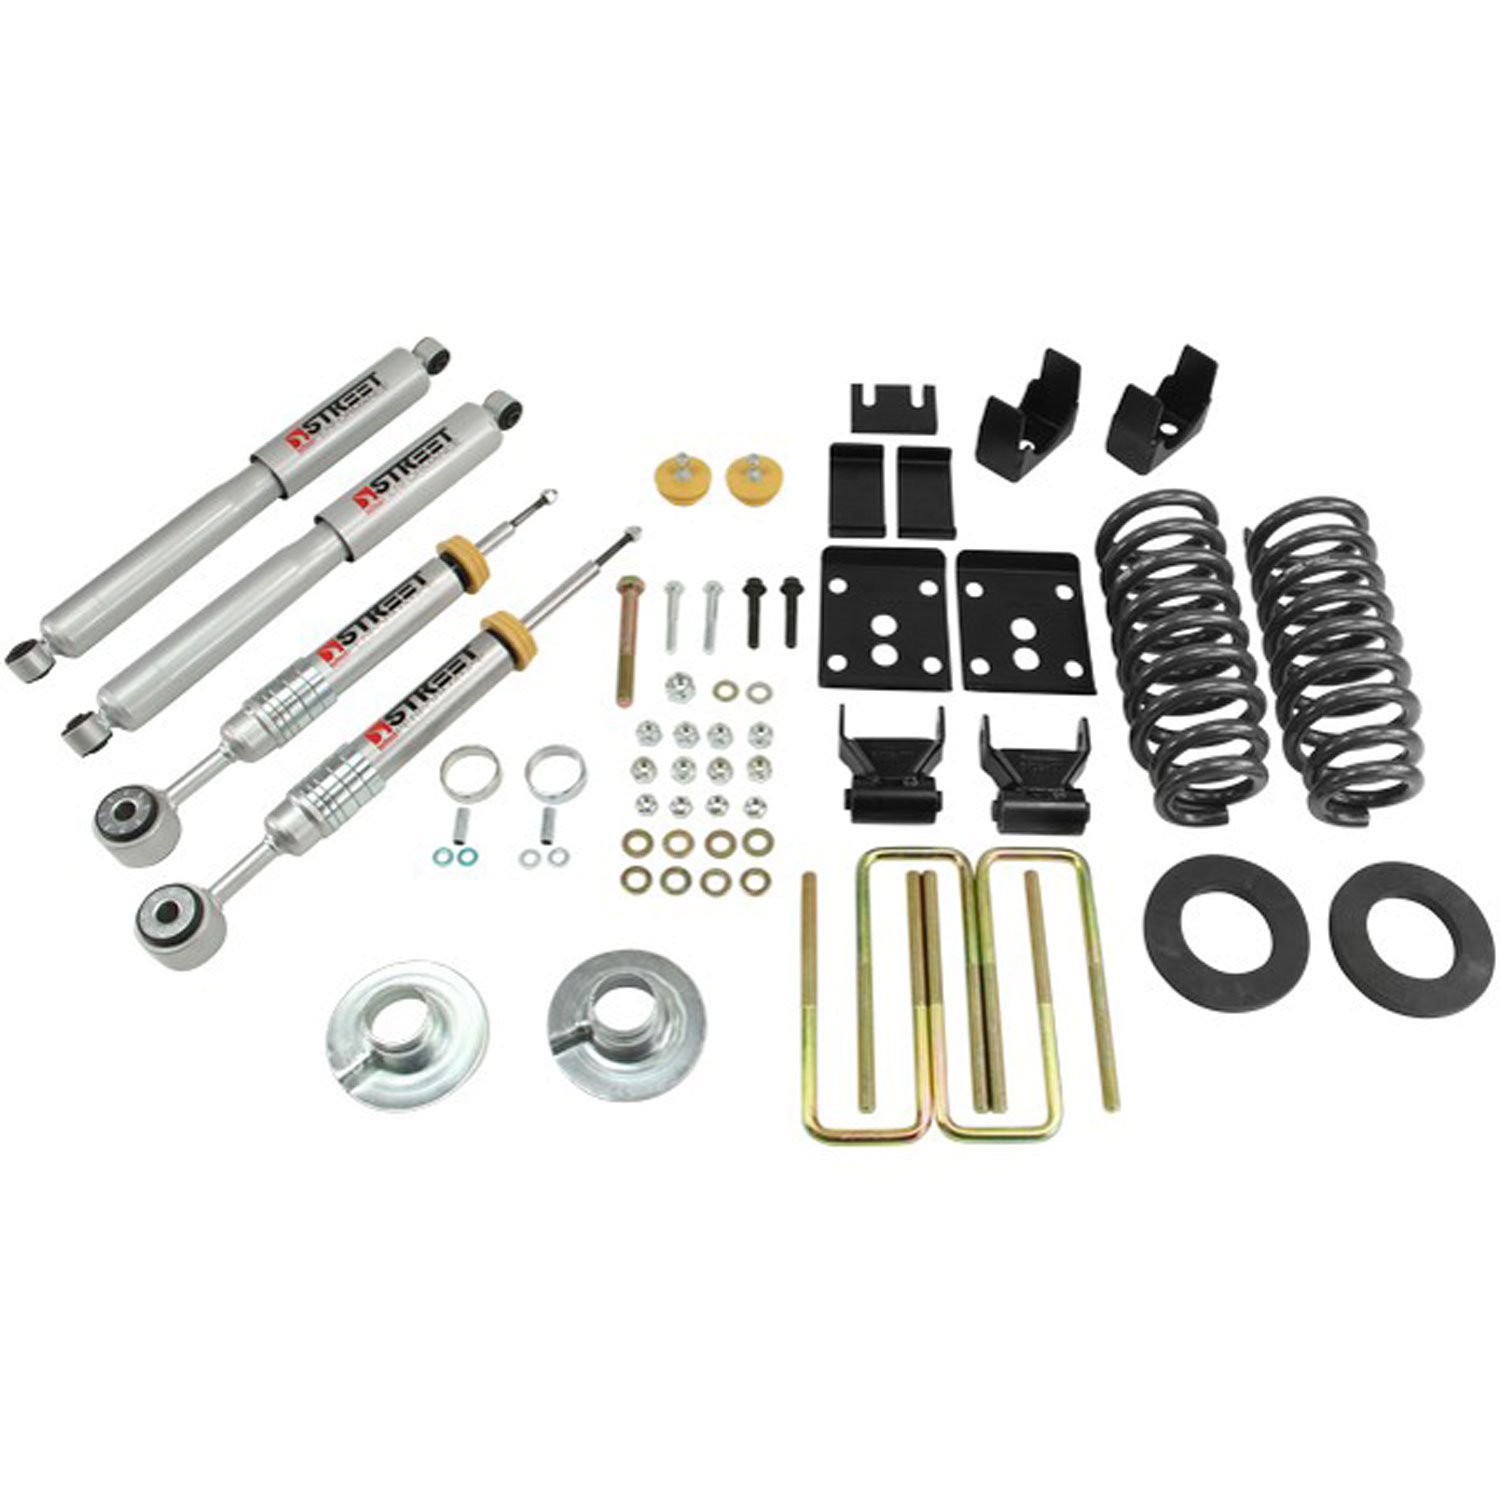 Complete Lowering Kit for 1999-2013 Ford F-150